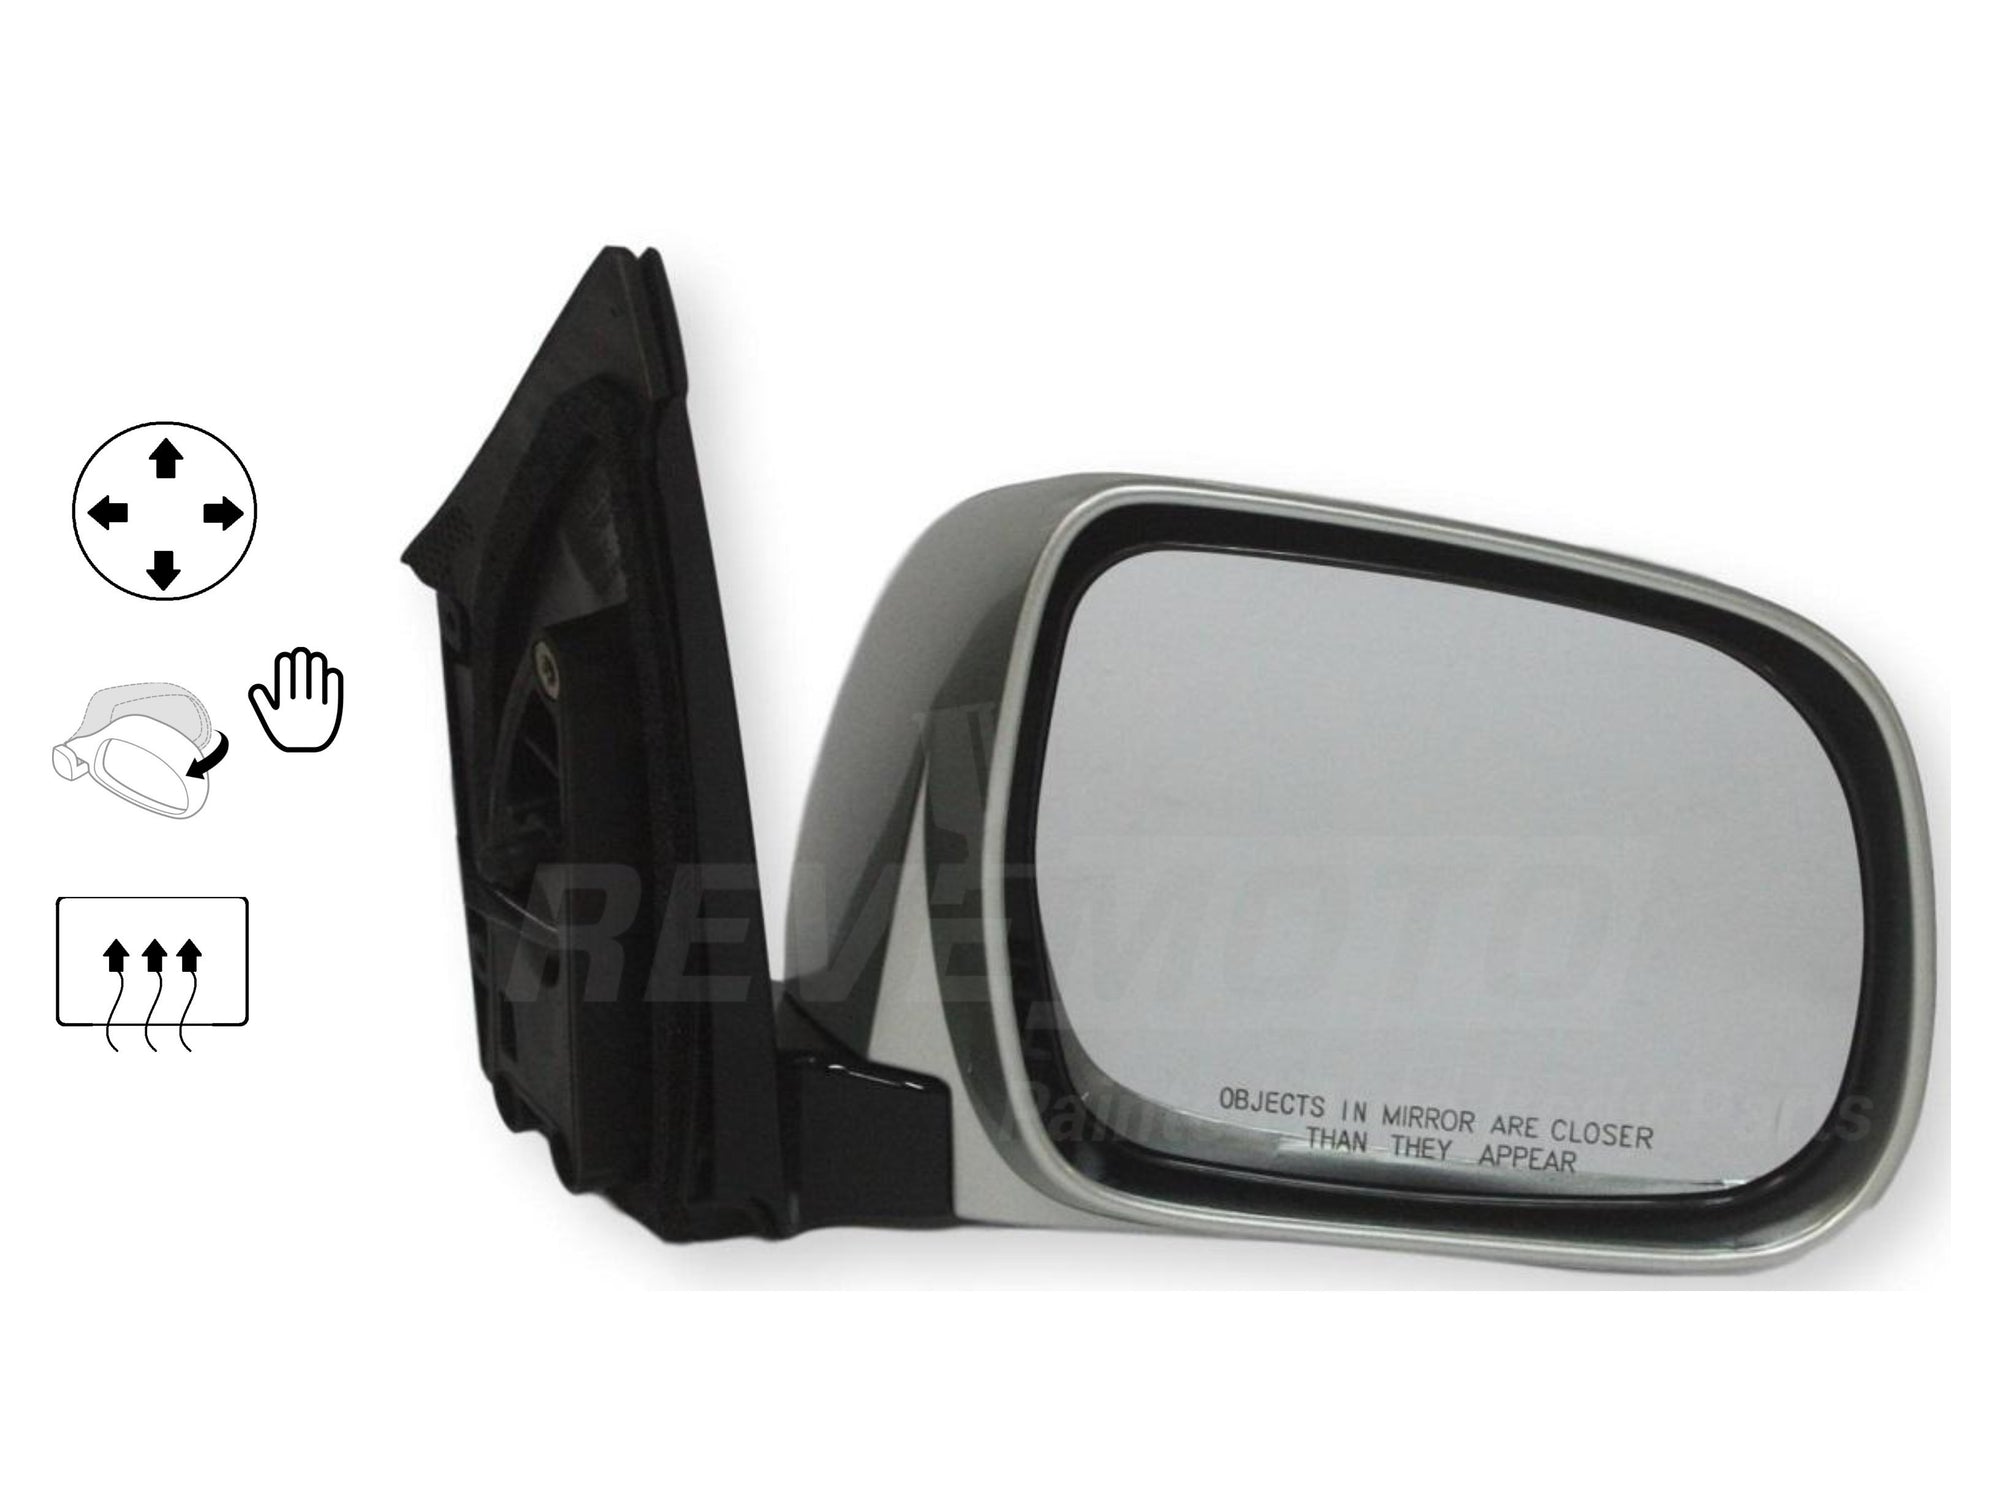 2004 Lexus RX330 : Side View Mirror Painted